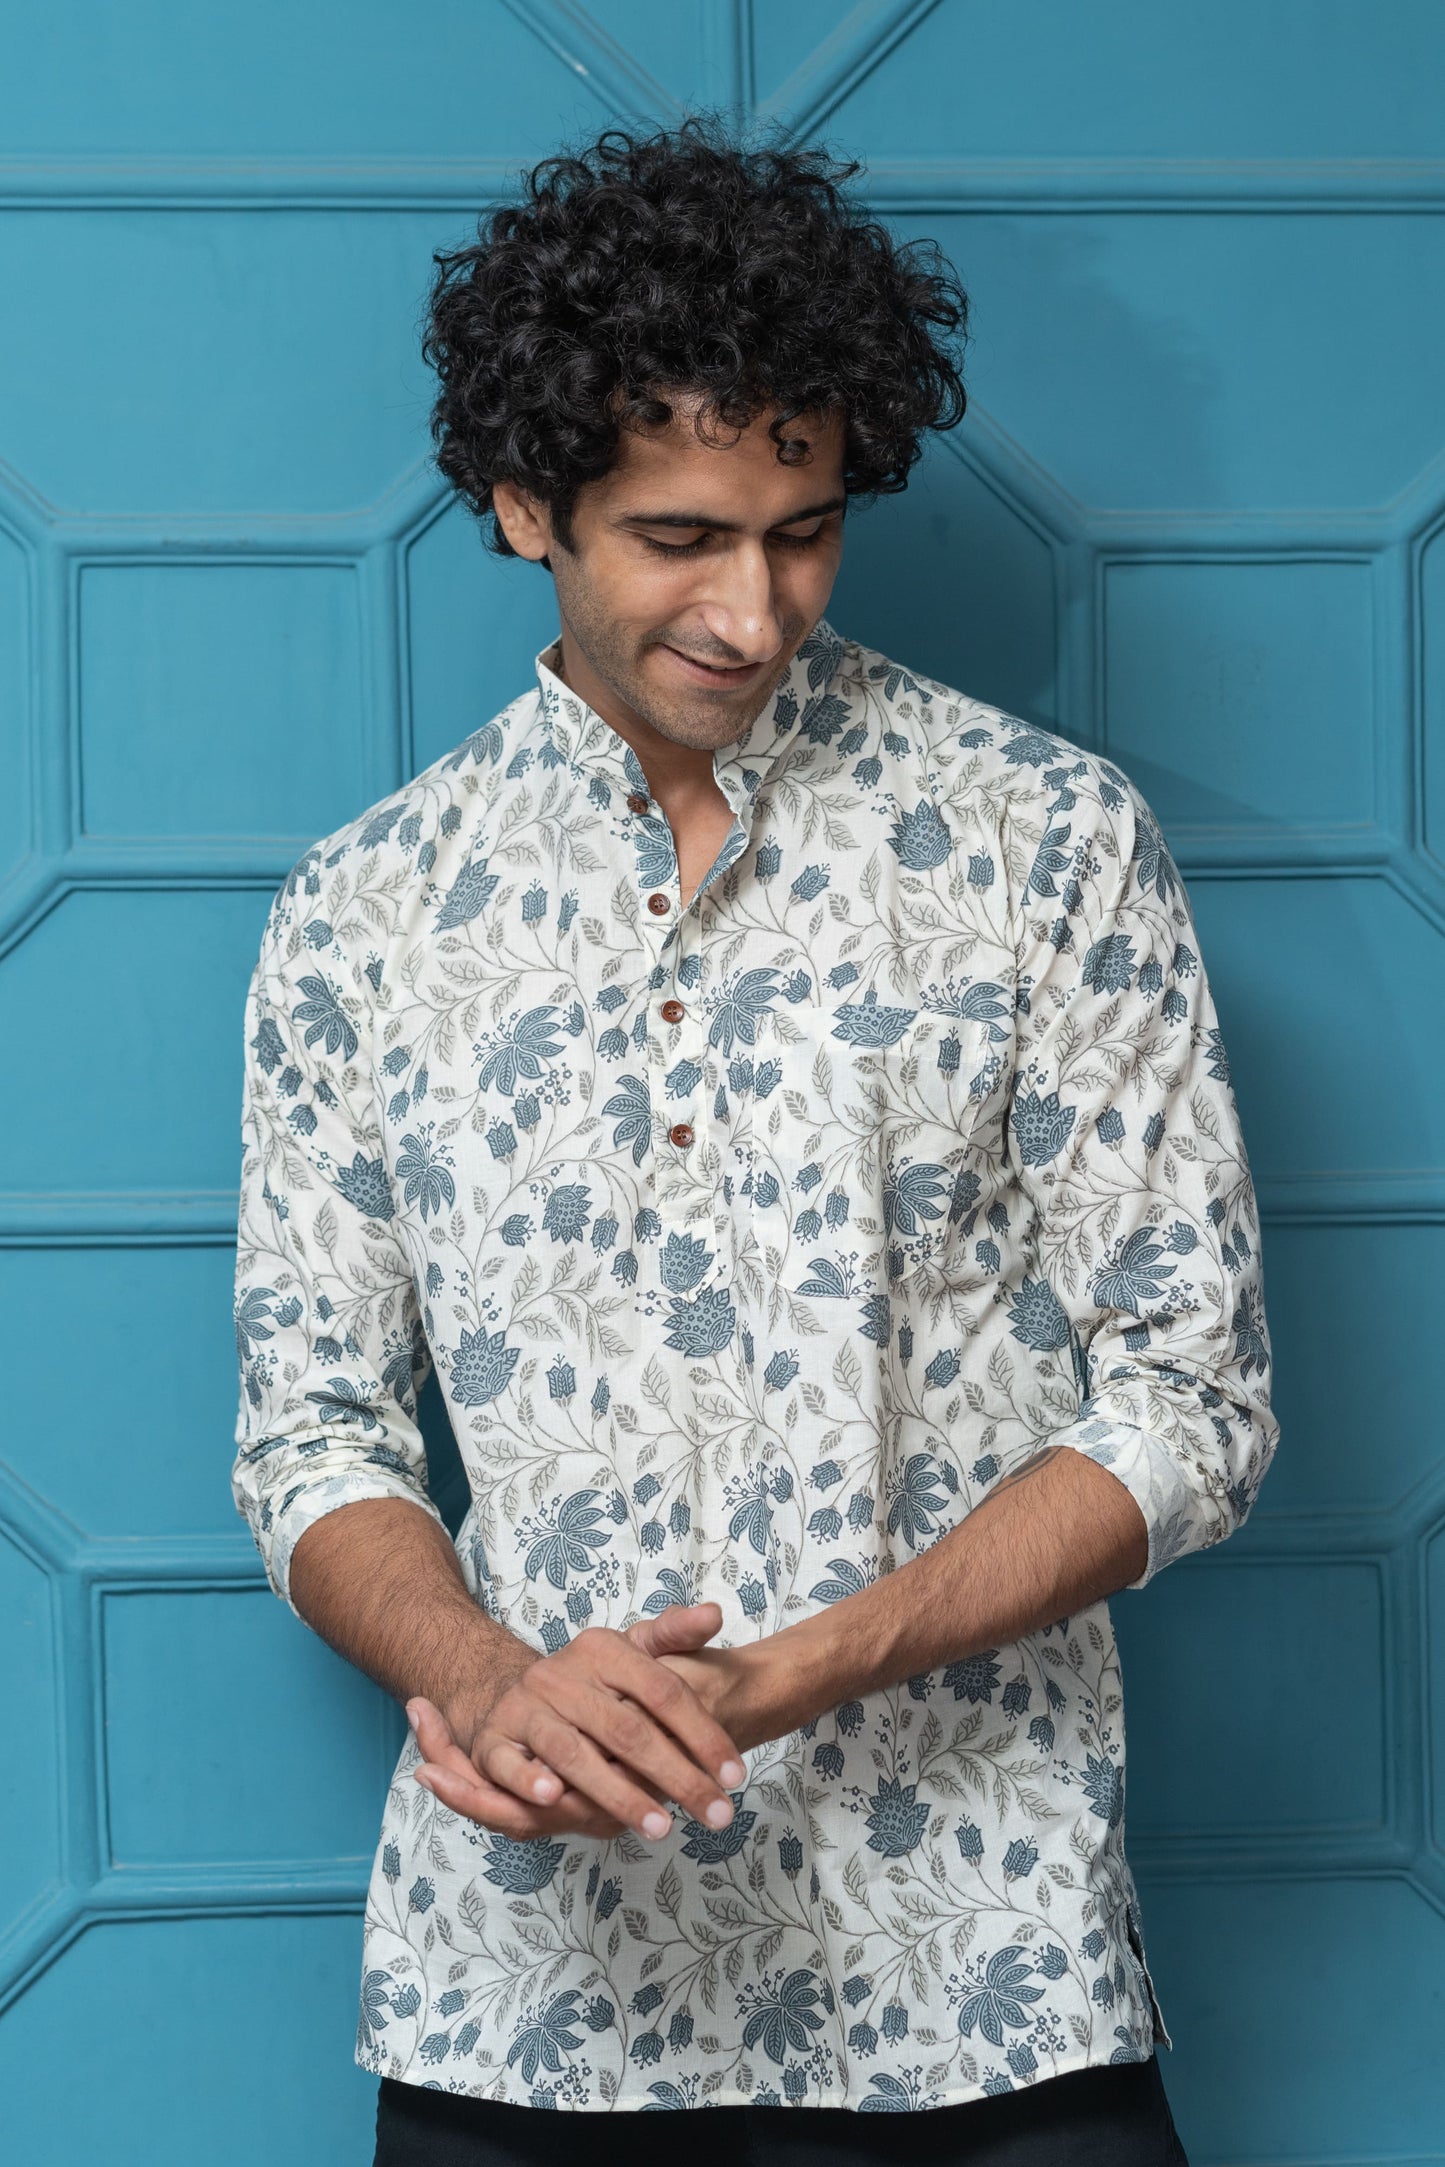 The White Short Kurta With All-Over Floral Print